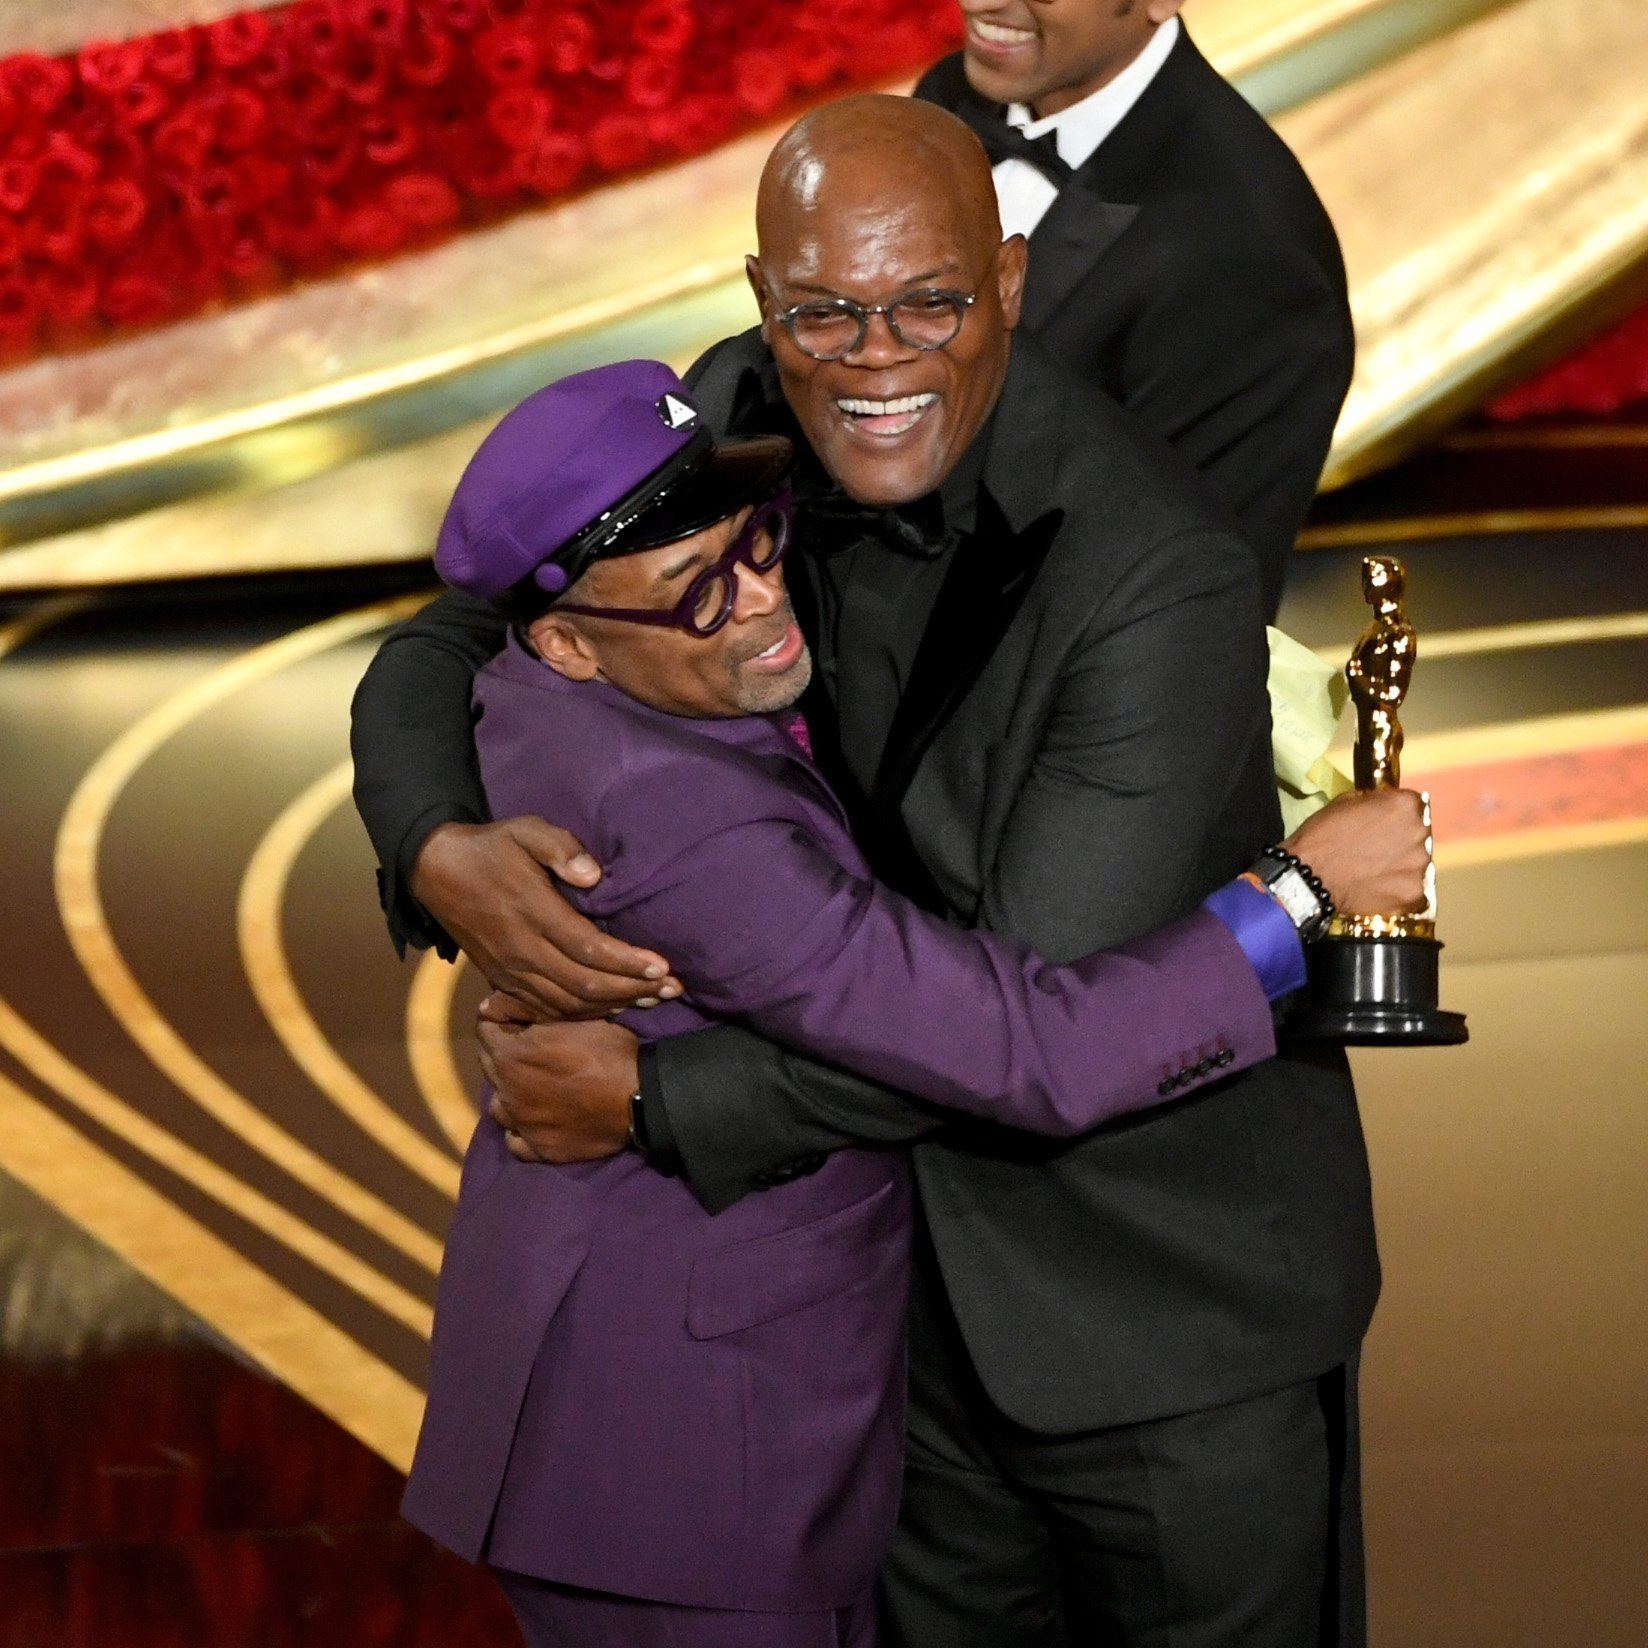 Samuel Jackson hugging Spike Lee at the 91st Annual Academy Awards | Photo: Getty Images